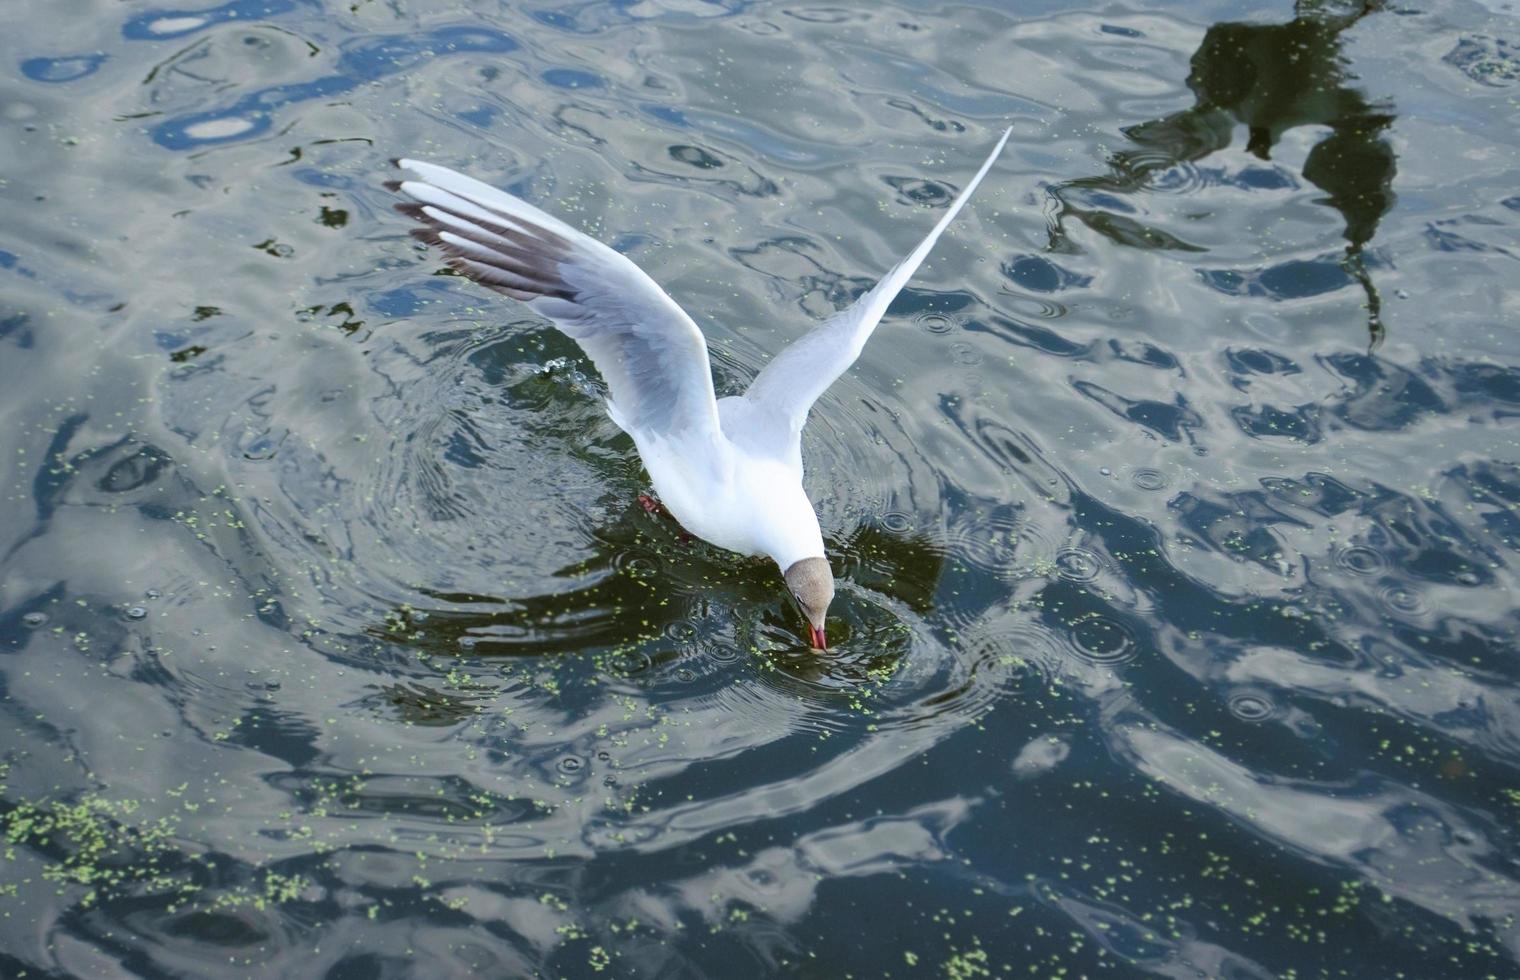 Seagull eat something. Bird found something in the water. Seagull on water. Seagull wingbeat. Seagulls on pond. Bird on motion. Reflection on water. photo